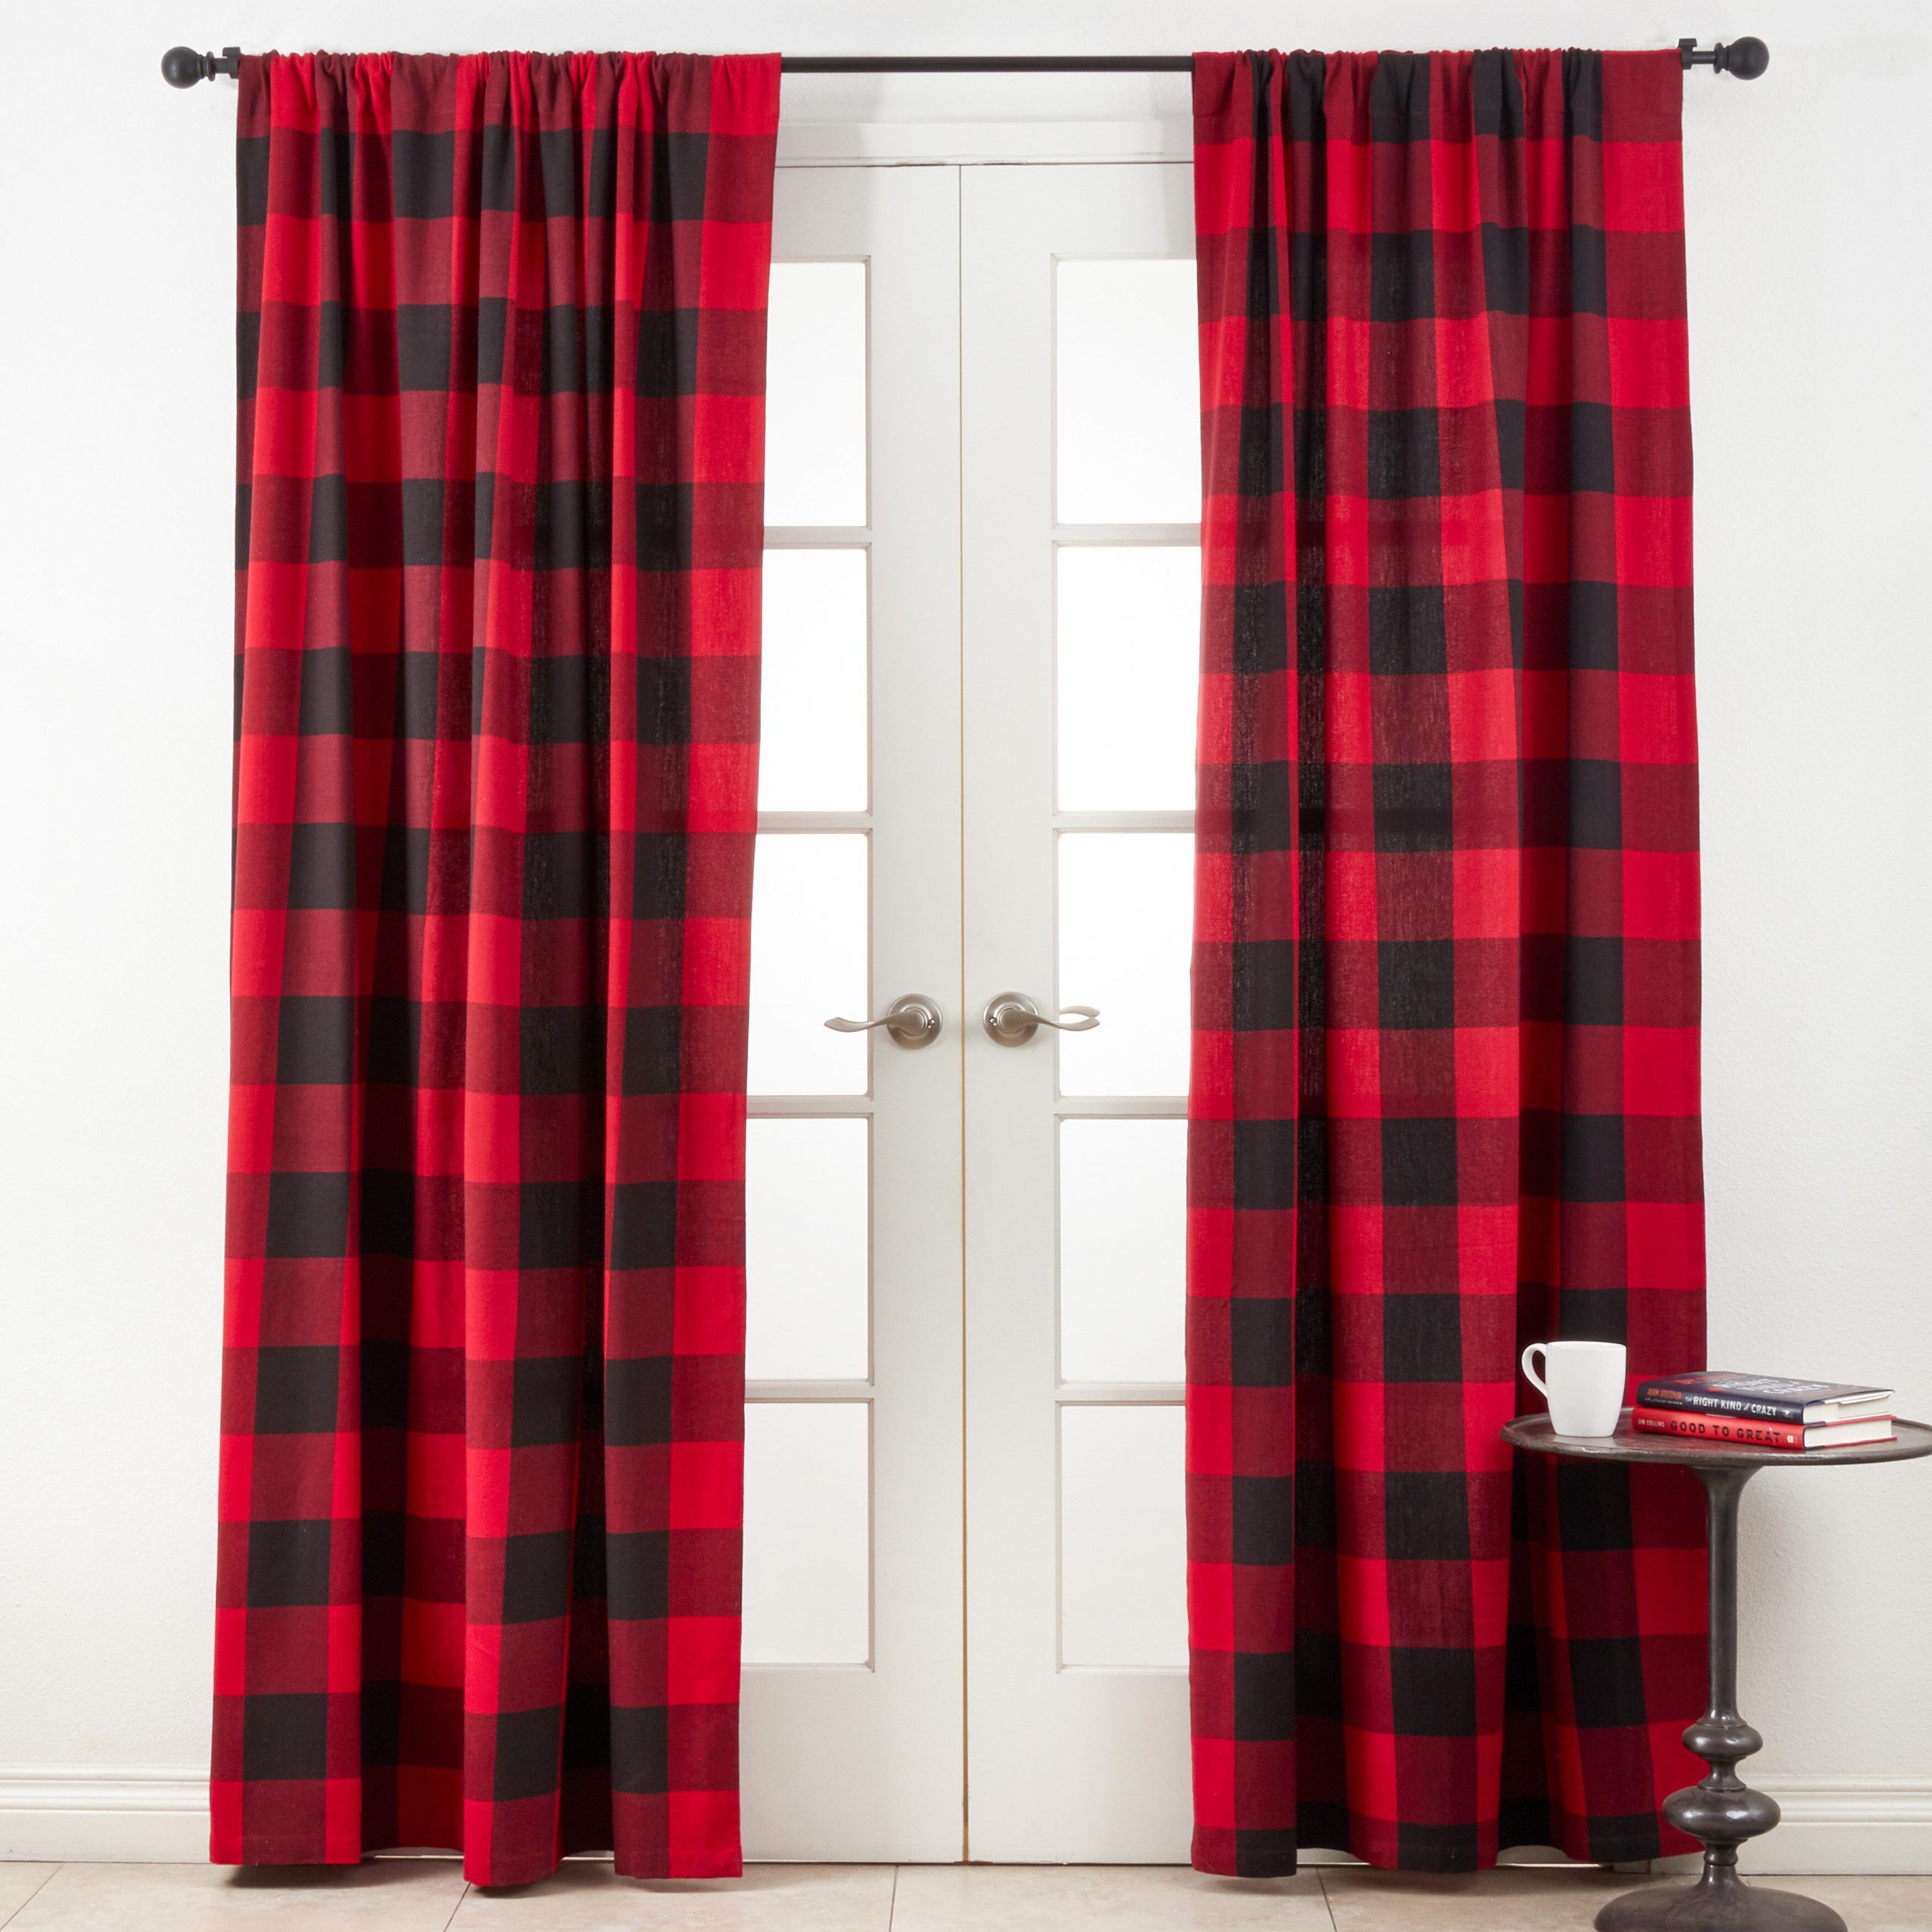 Celinda Plaid Room Darkening Single Curtain Panel Throughout Burgundy Cotton Blend Classic Checkered Decorative Window Curtains (View 17 of 20)